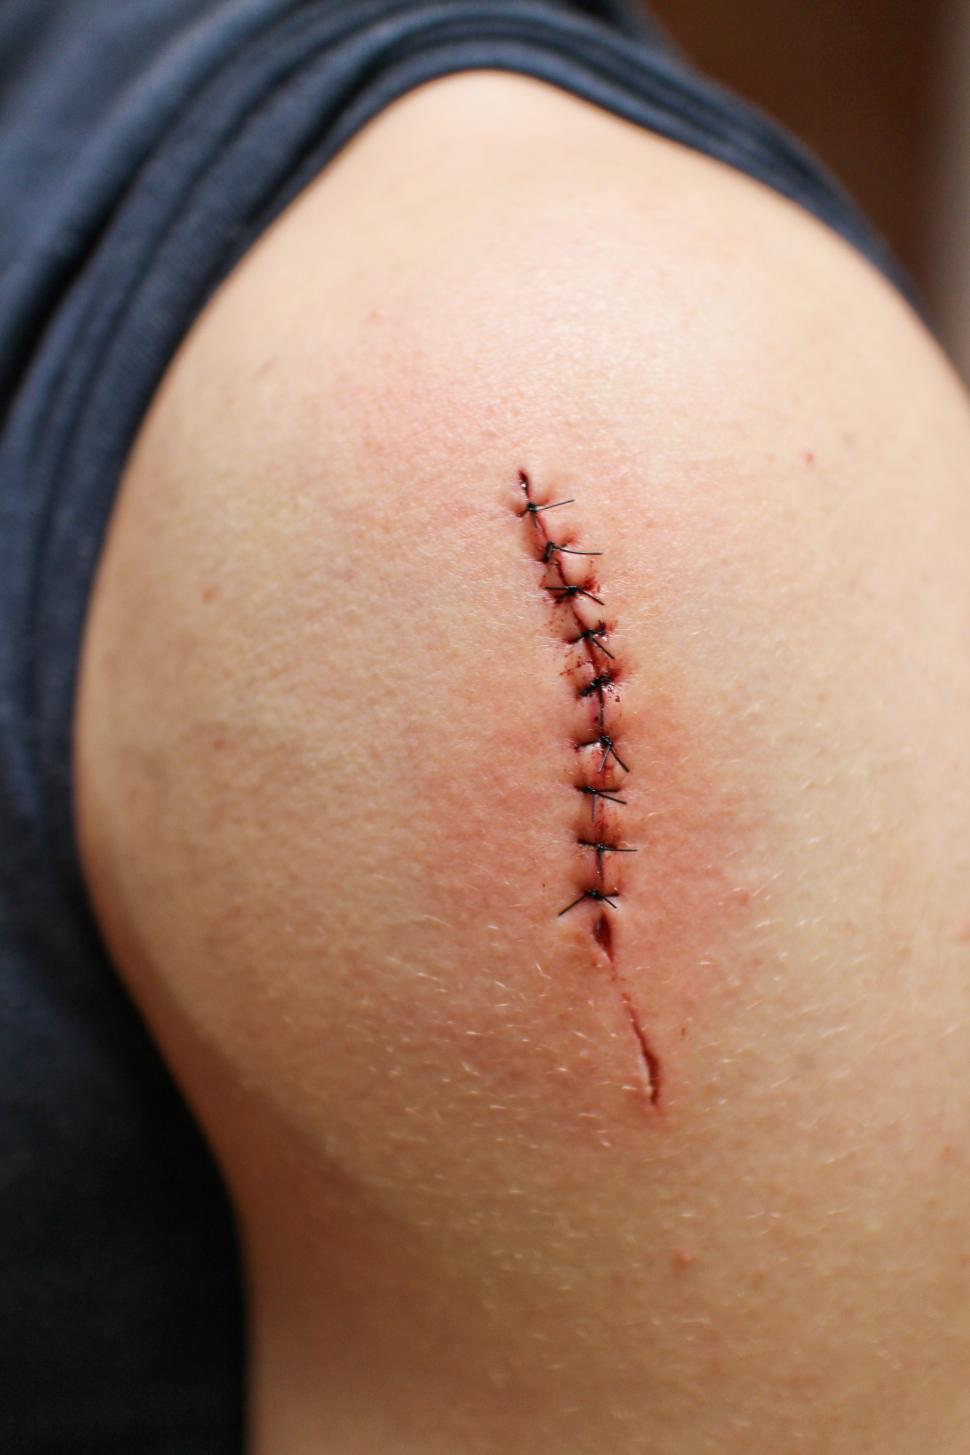 Free Image of Stitches on wound 